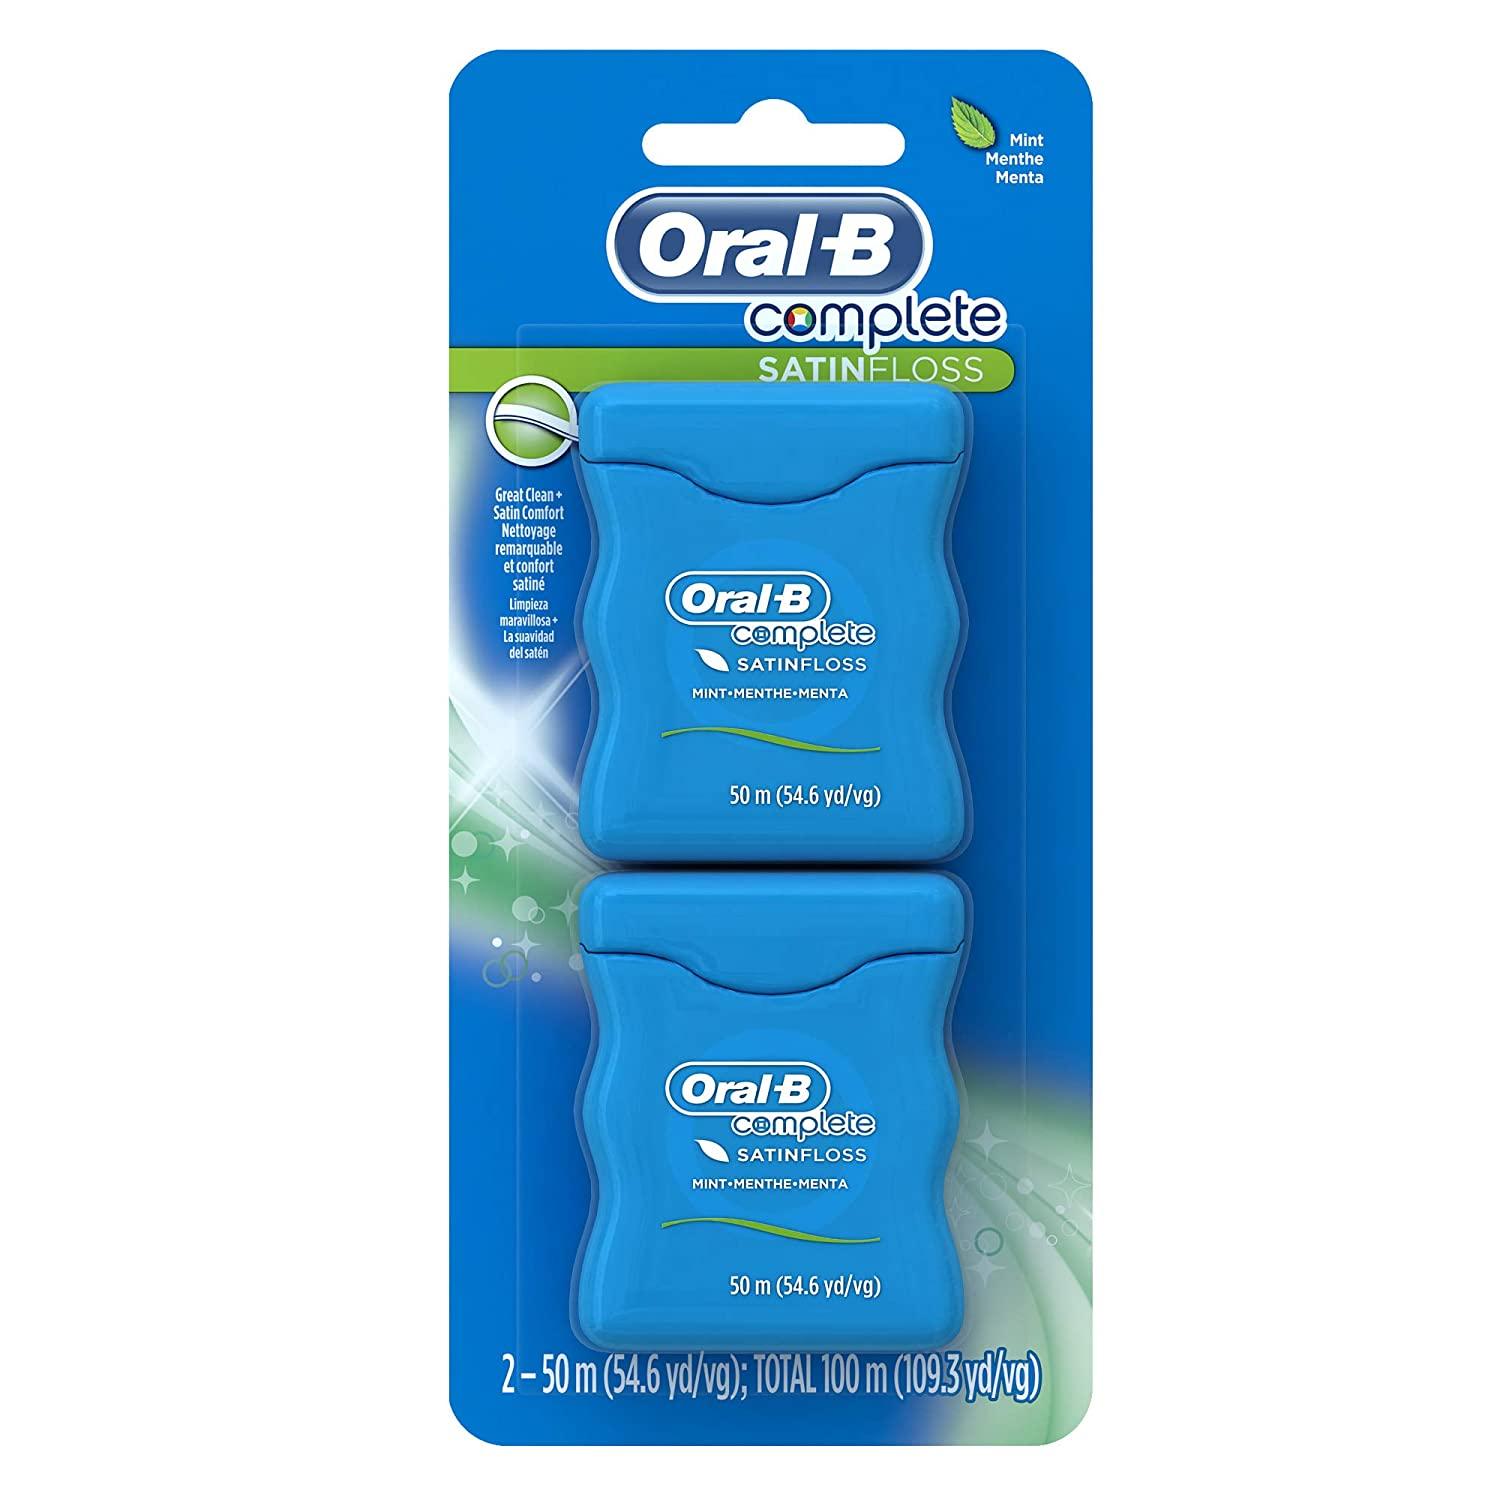 6 Oral-B Complete SatinFloss Dental Floss for $6.19 Shipped